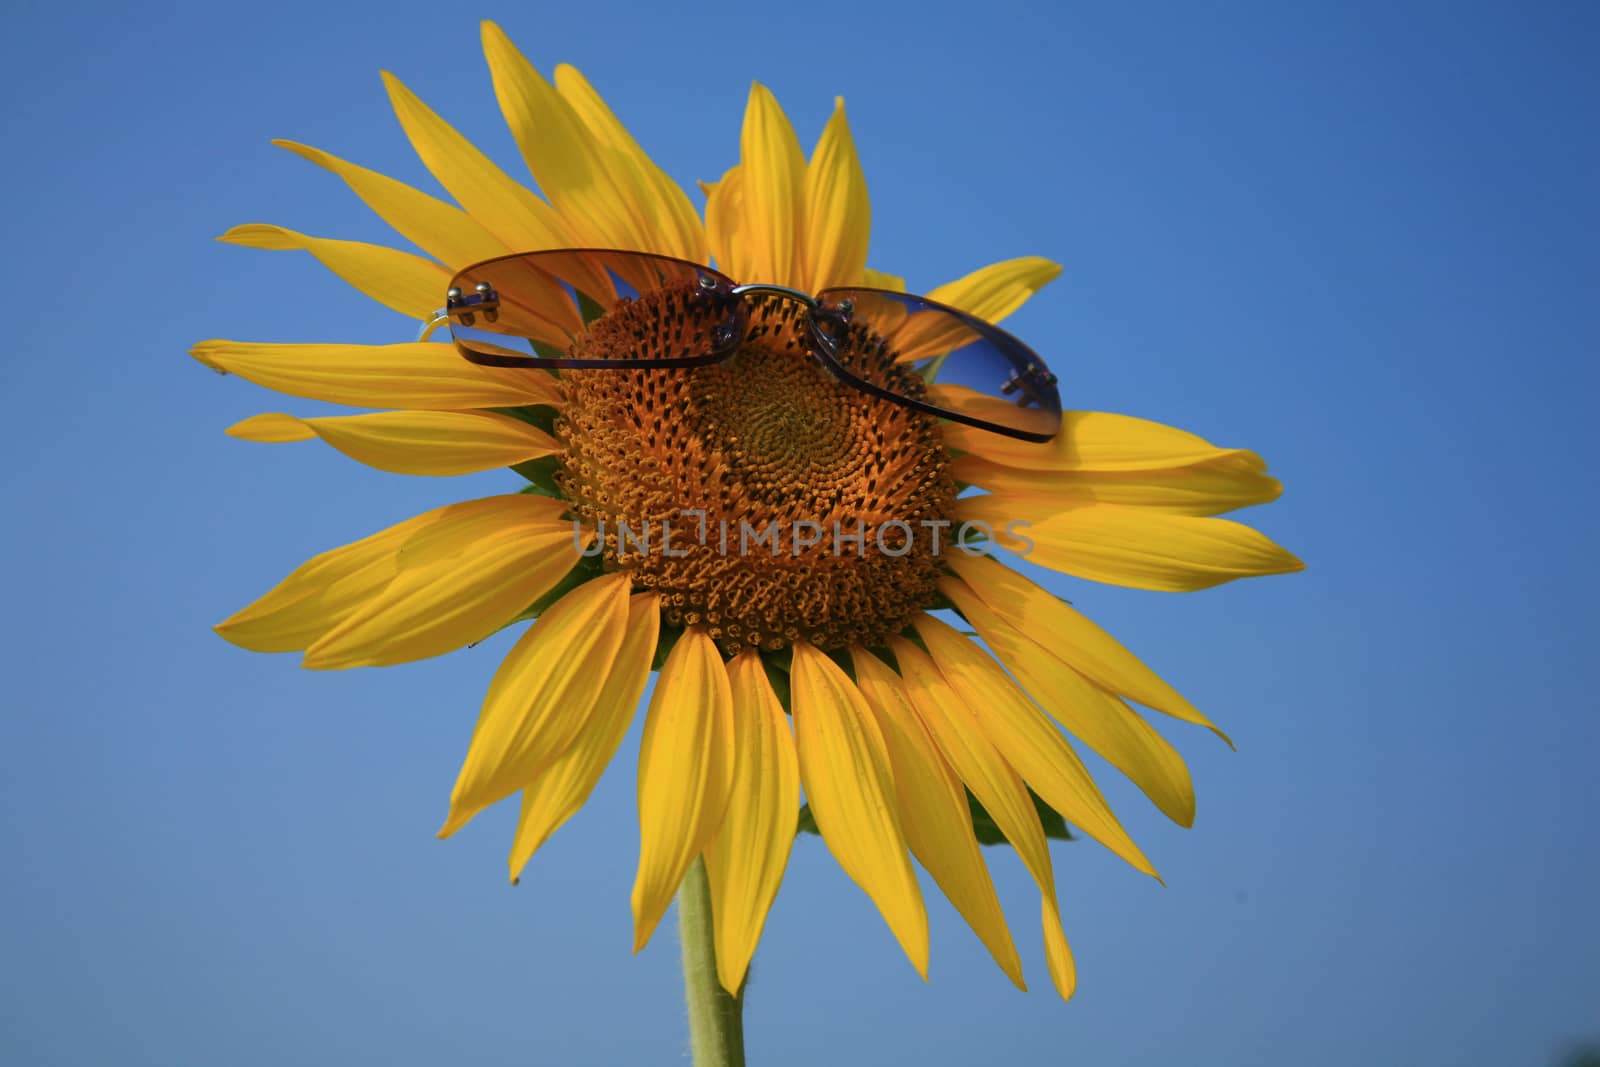 yellow sunflower in sunglasses with blue sky, Thailand. by think4photop